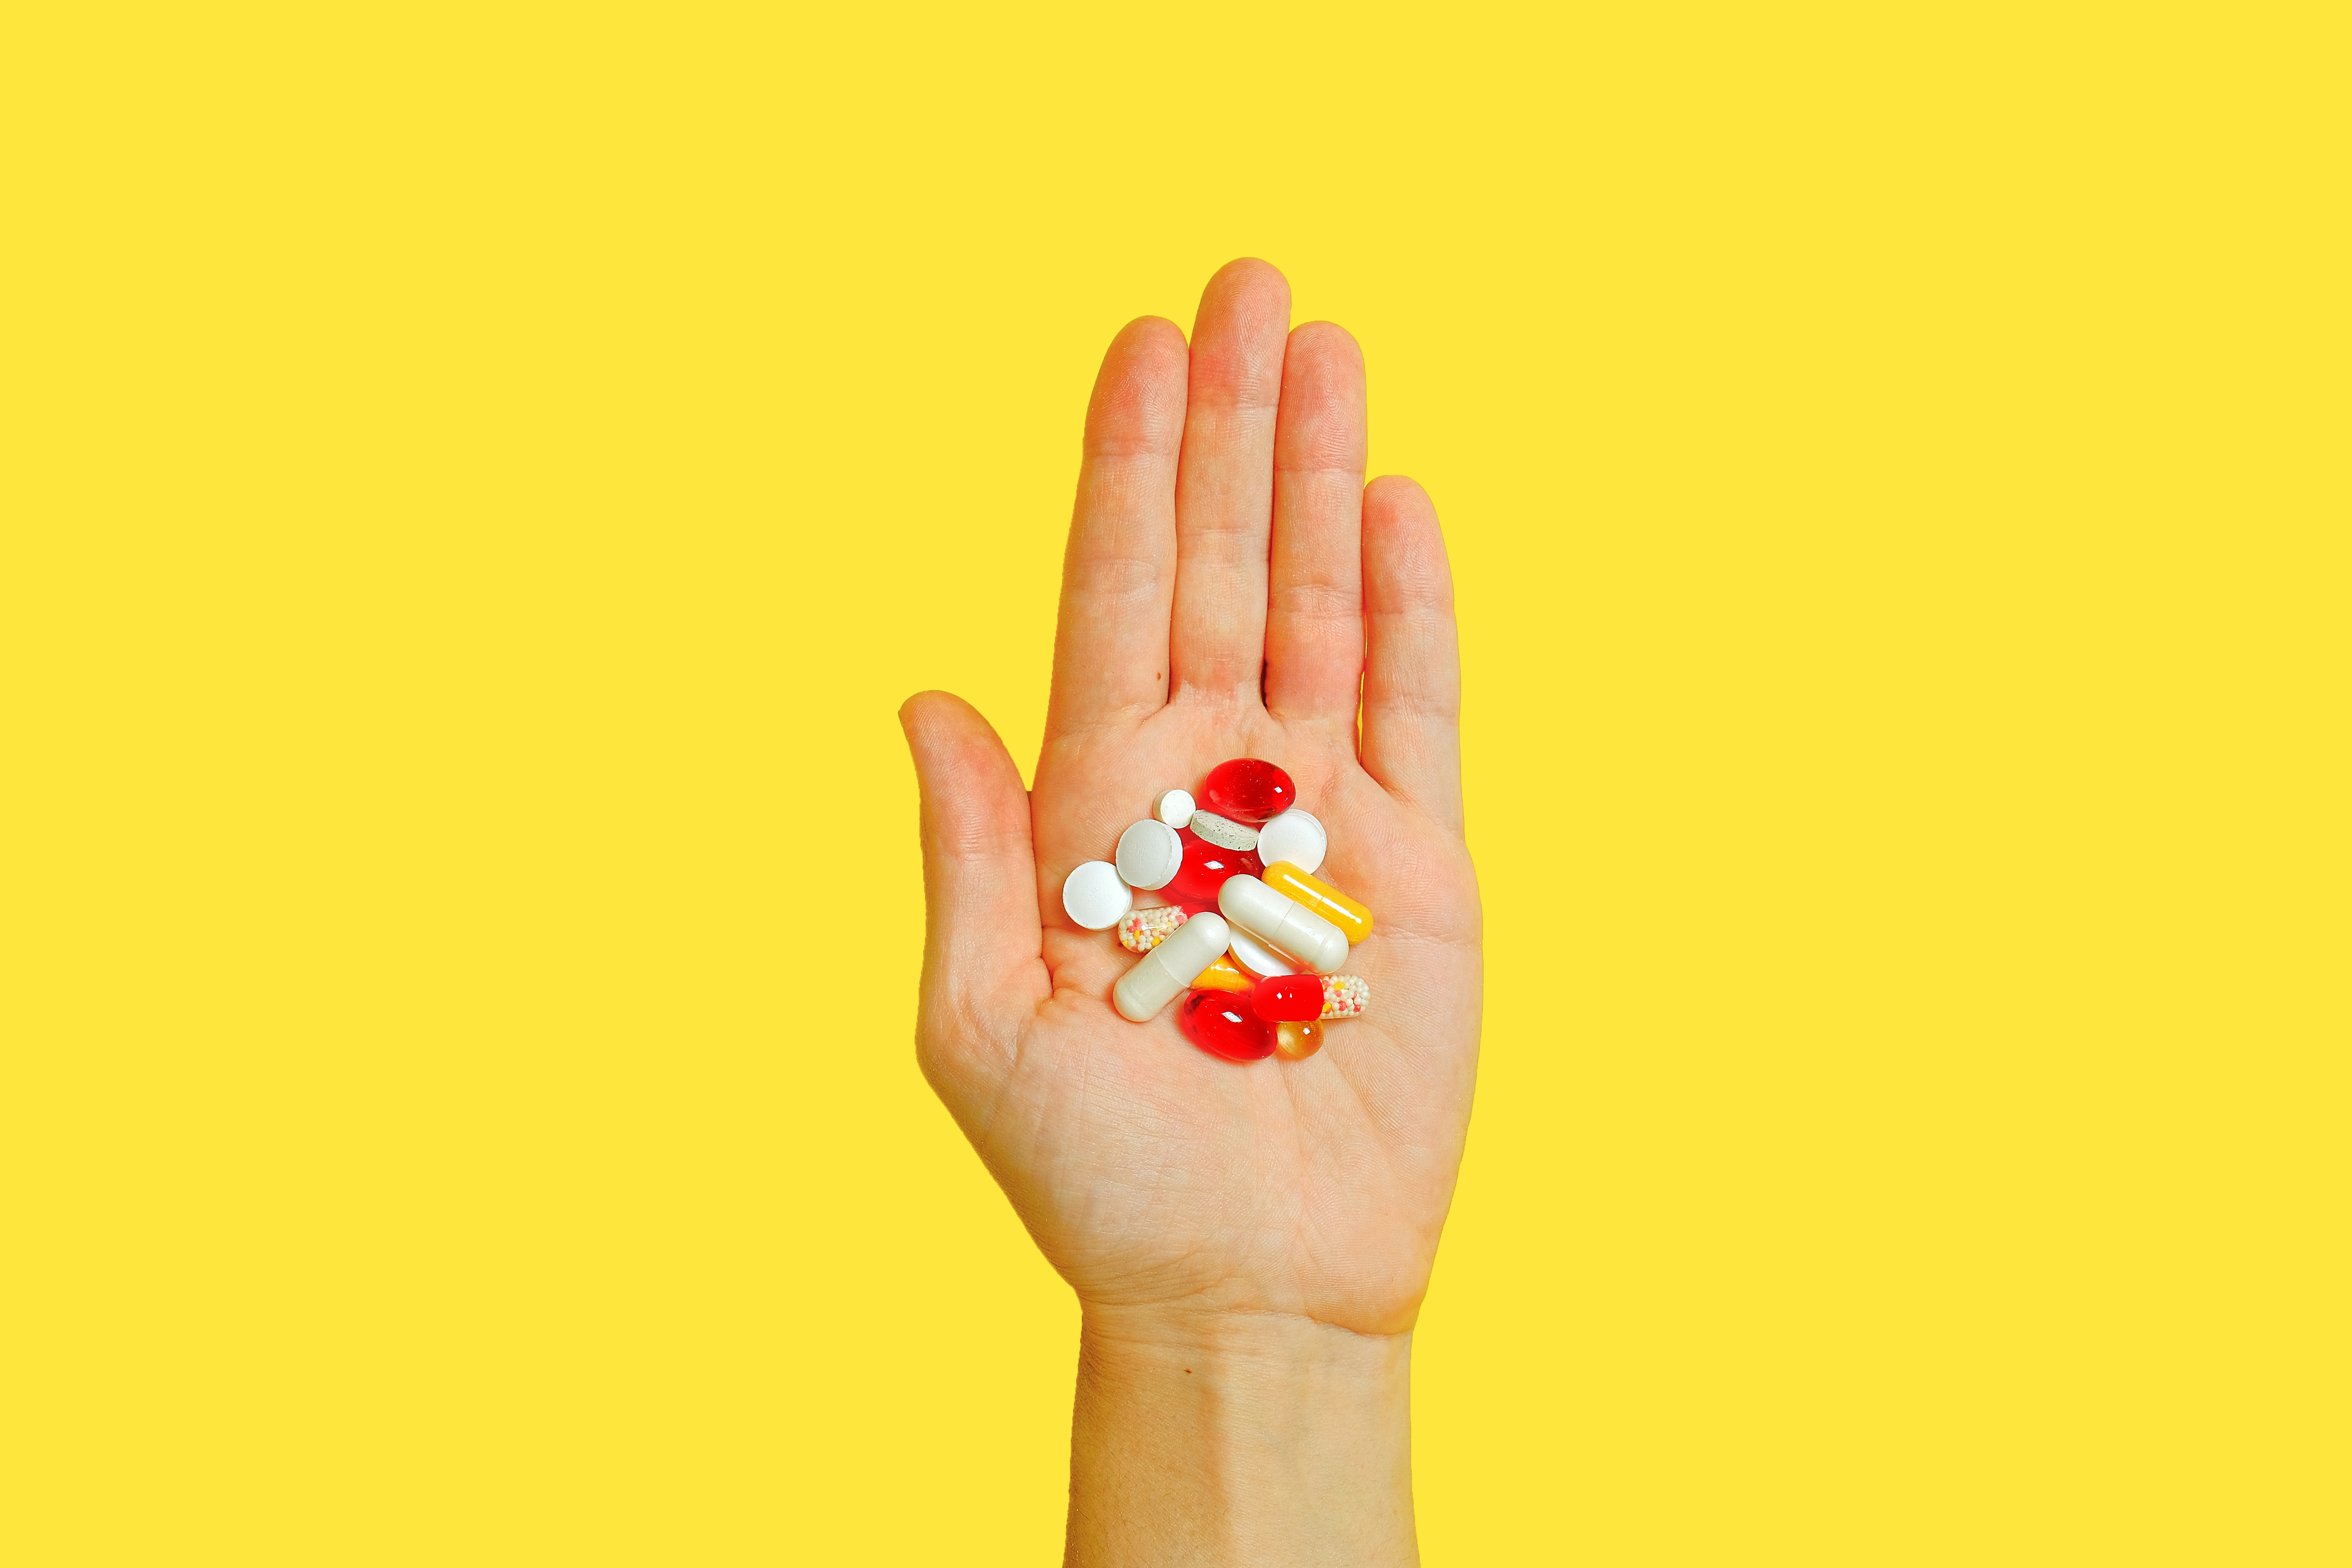 A Caucasian opened palm holding drug tablets of different sizes, shapes, and color on a yellow background